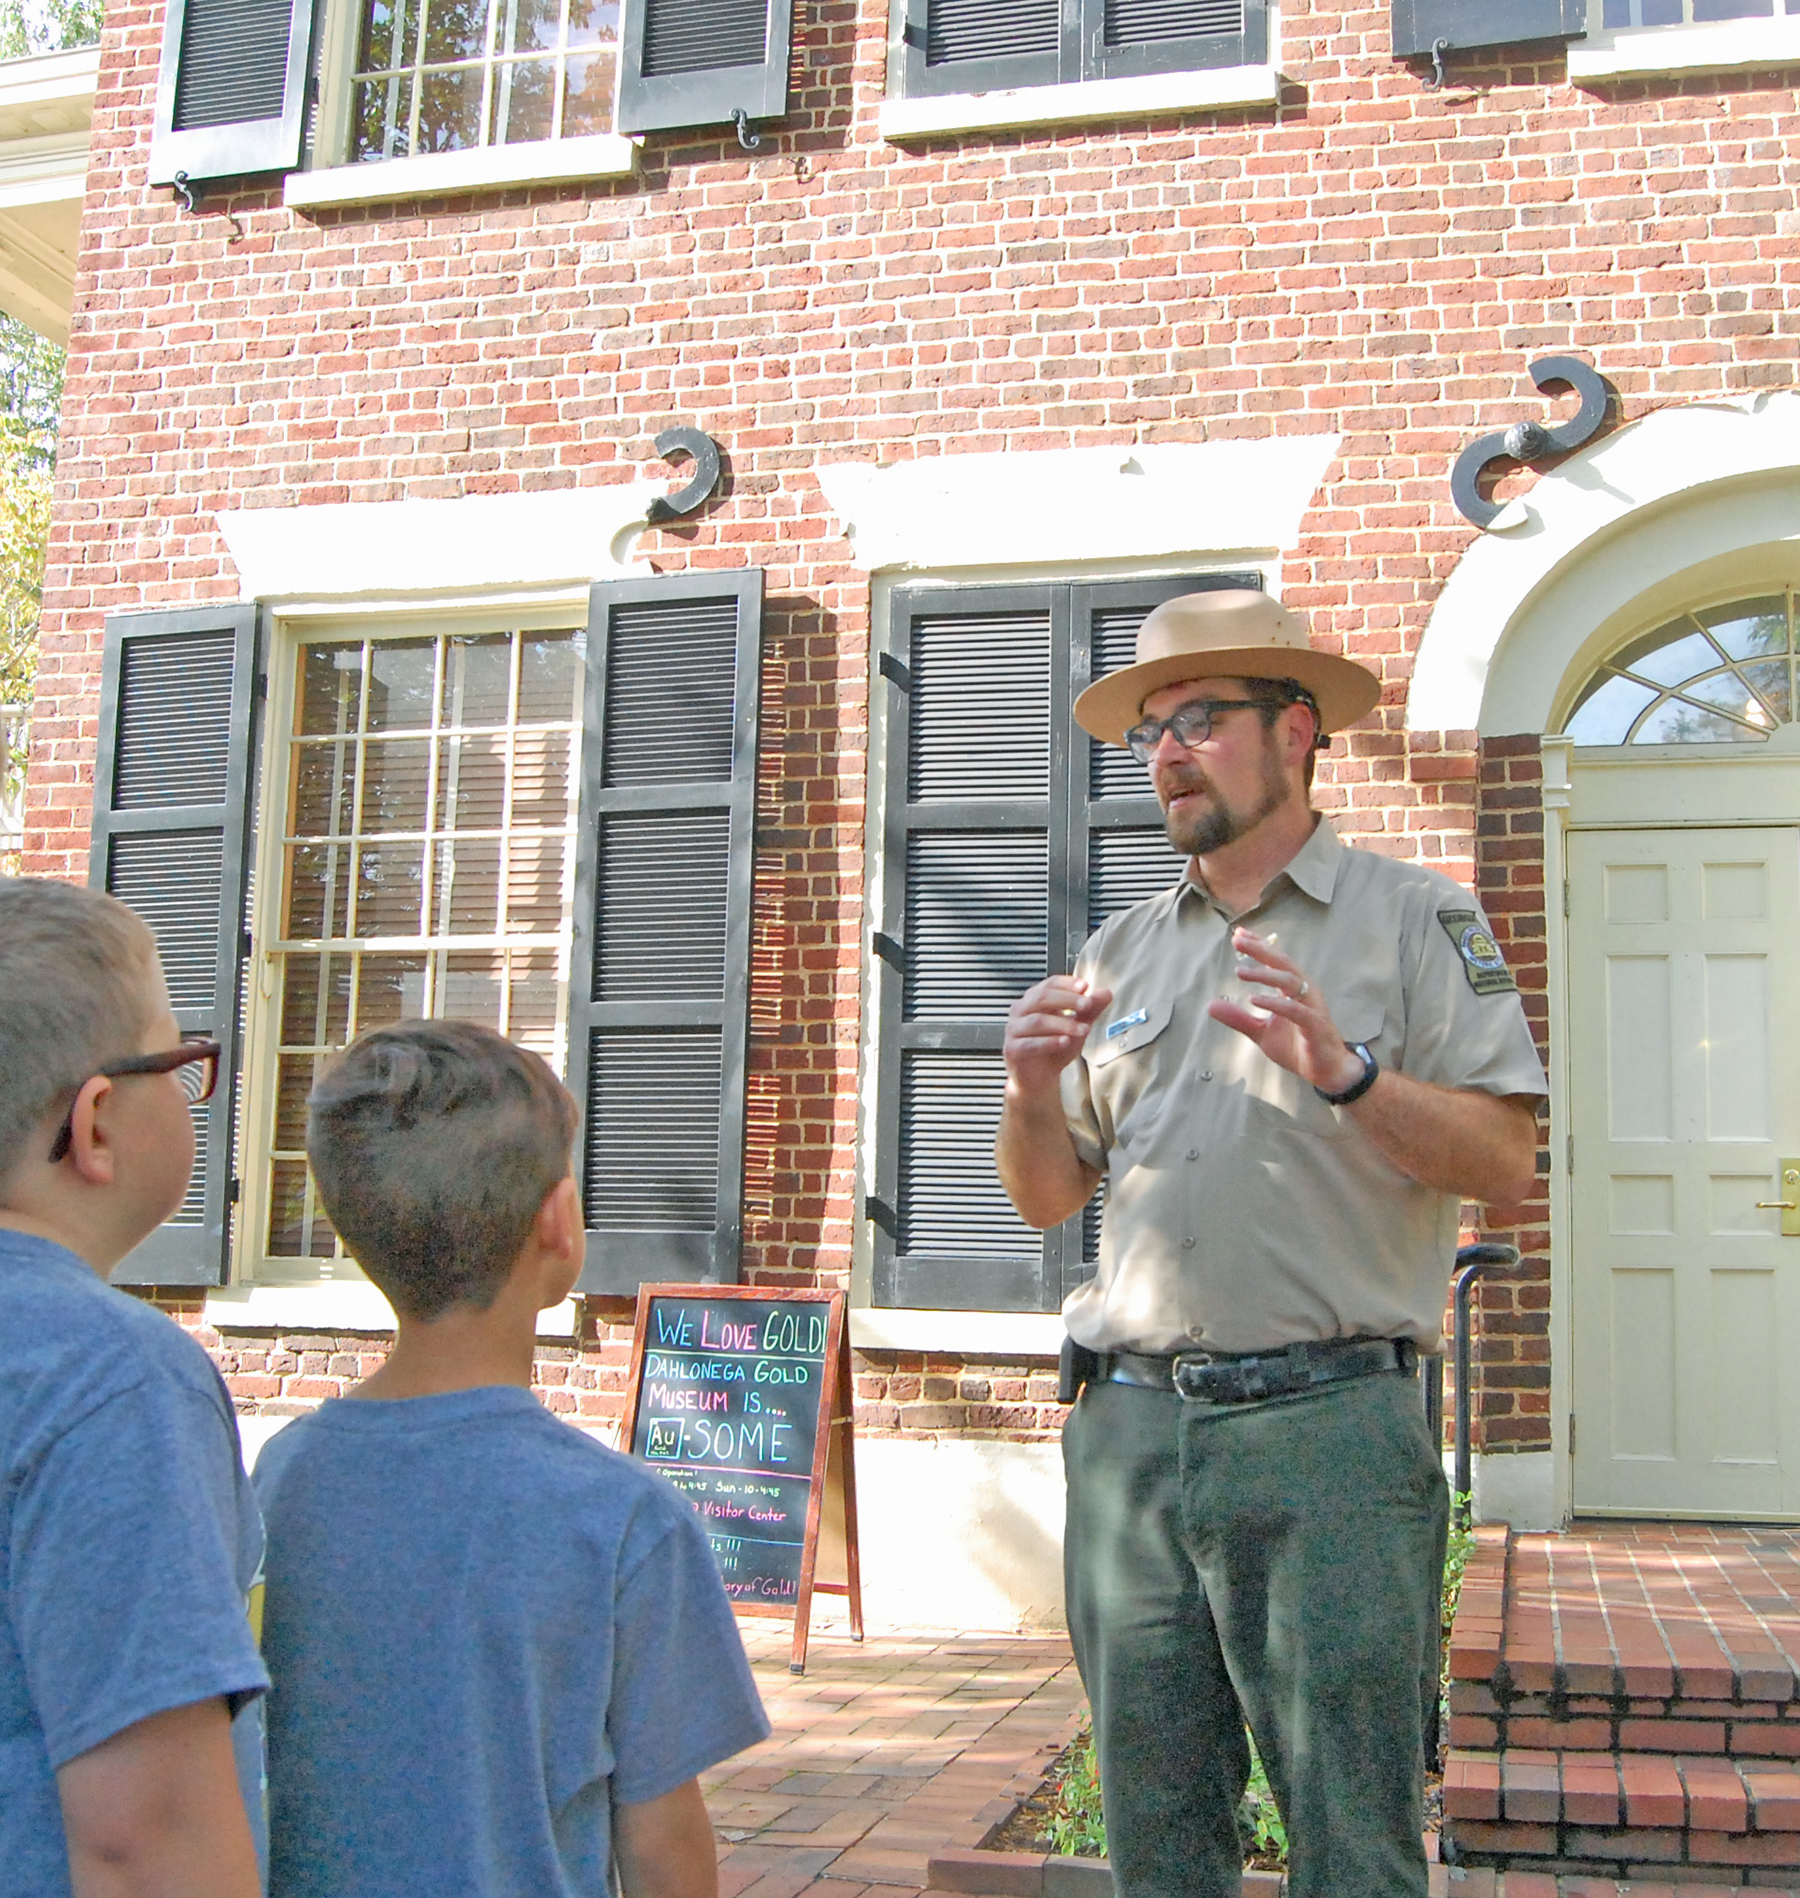 Site manager Sam McDuffie welcomes visitors to the 1836 Lumpkin County courthouse, which now serves as the Gold Museum. (Photo/John Bynum)